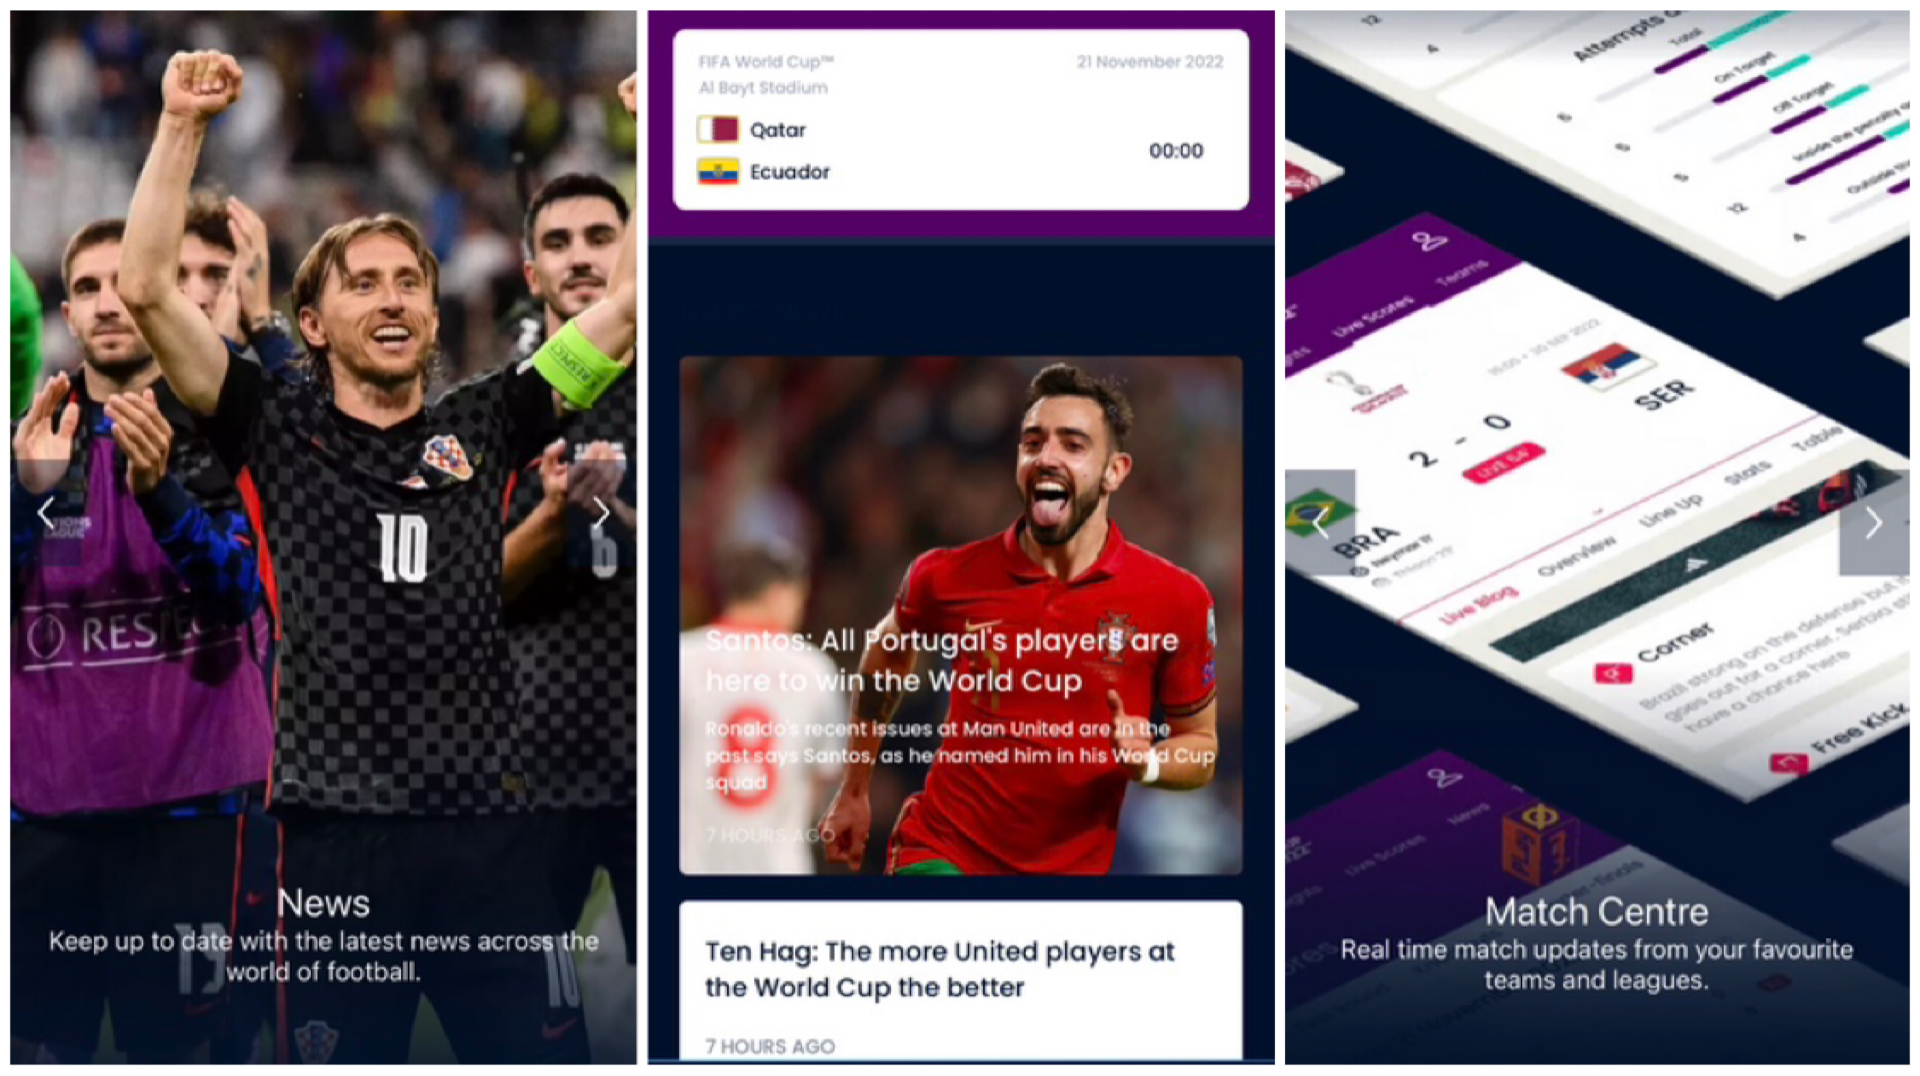 These are the best apps for following the 2022 World Cup - The Manual